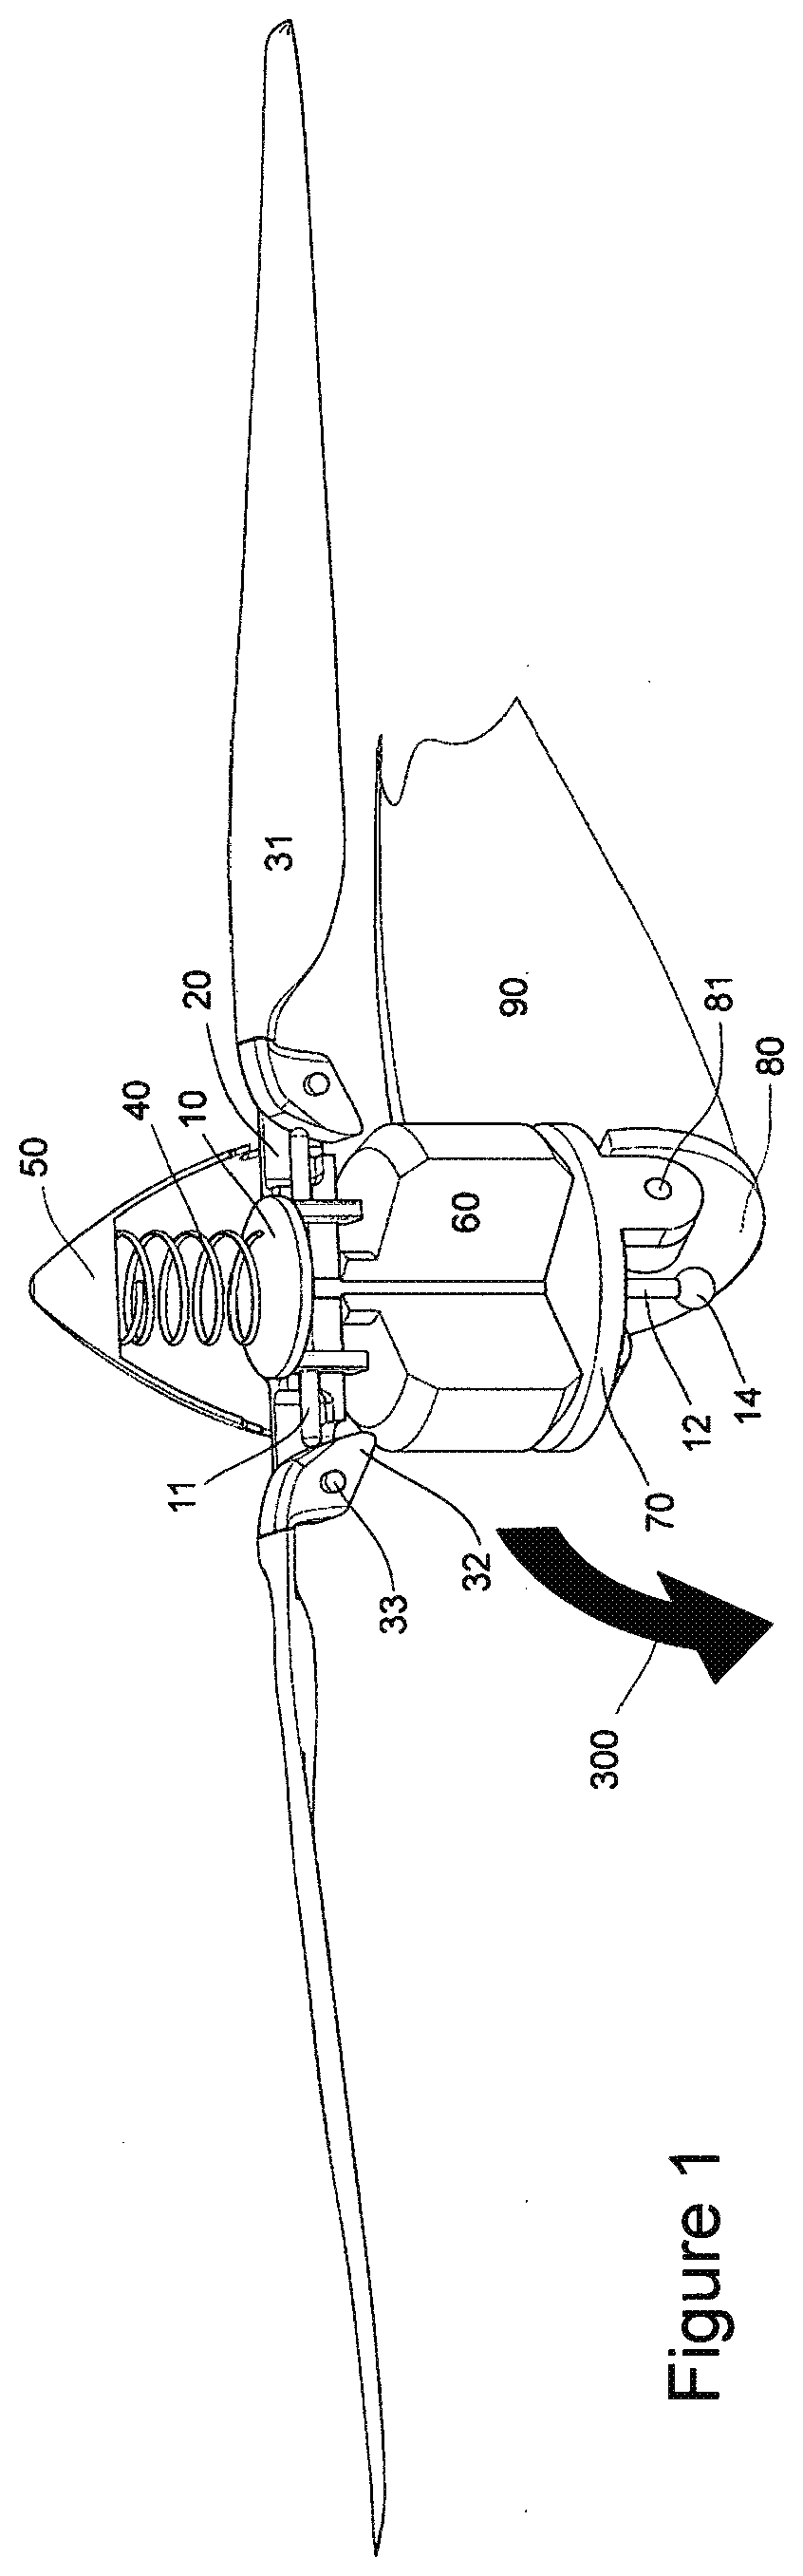 Propeller-Hub Assembly With Folding Blades For VTOL Aircraft